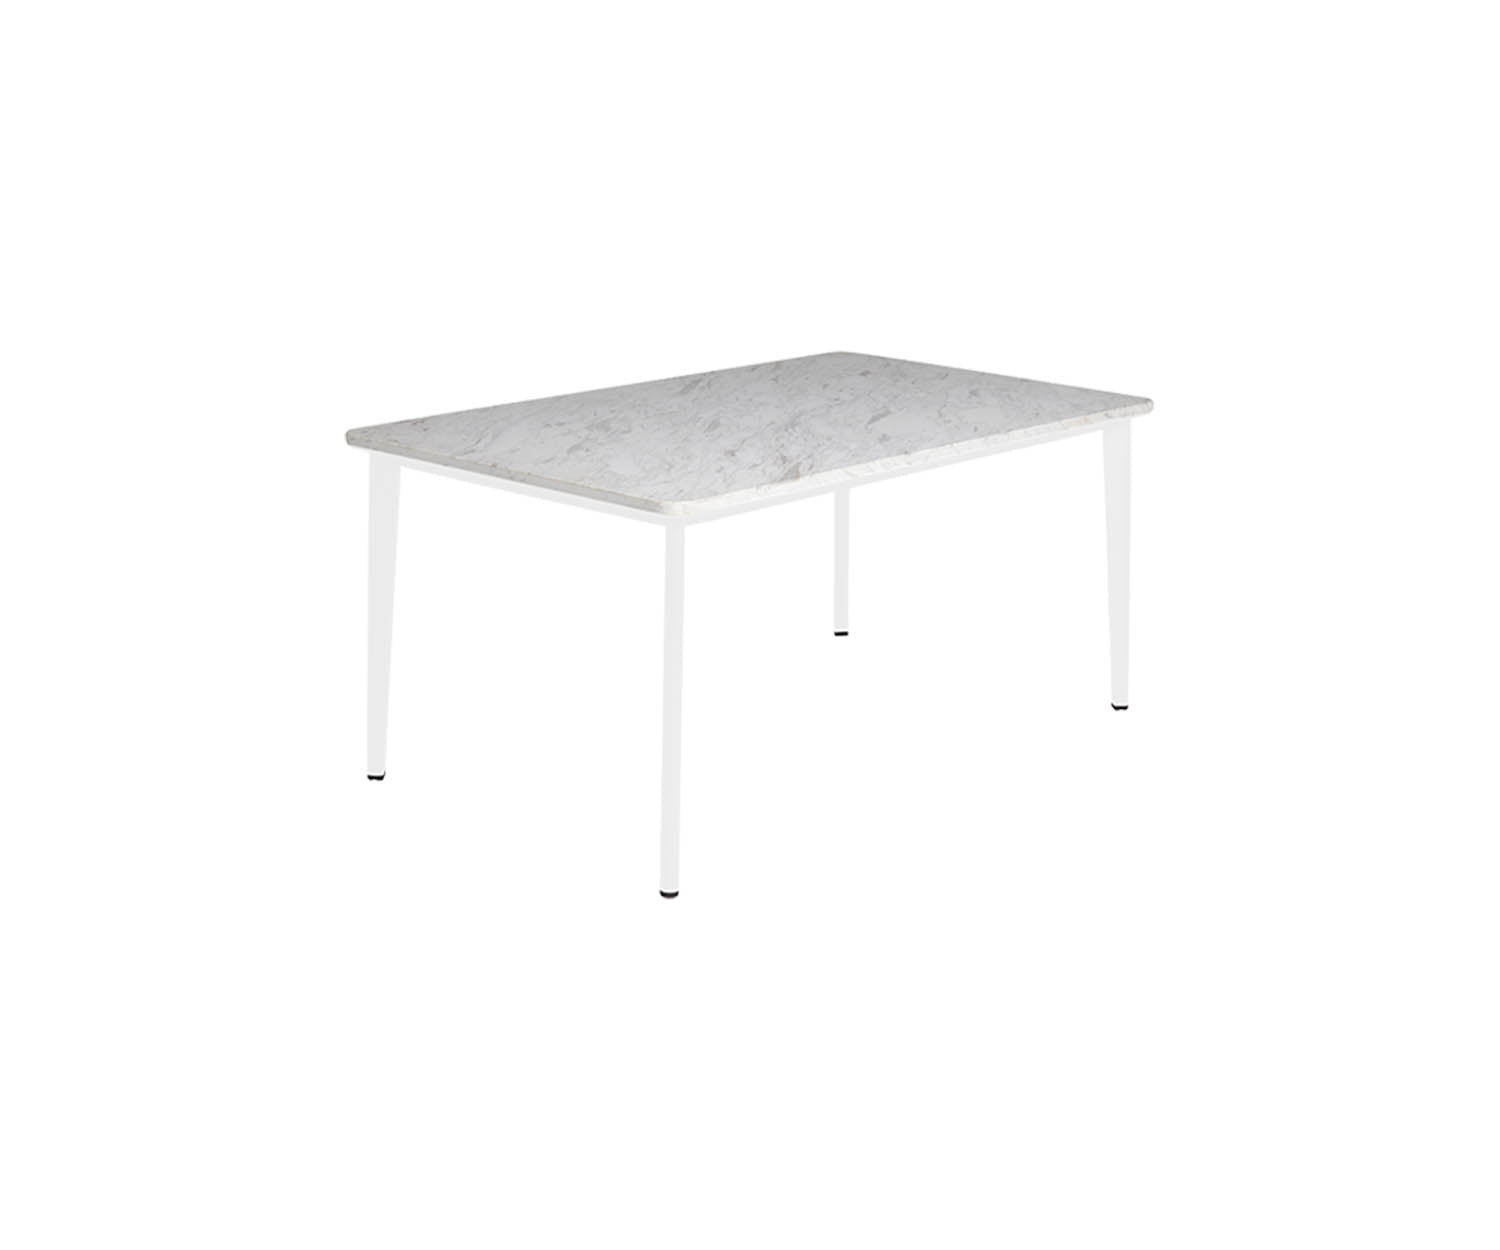 Triconfort, Riba 40706 Dining Table